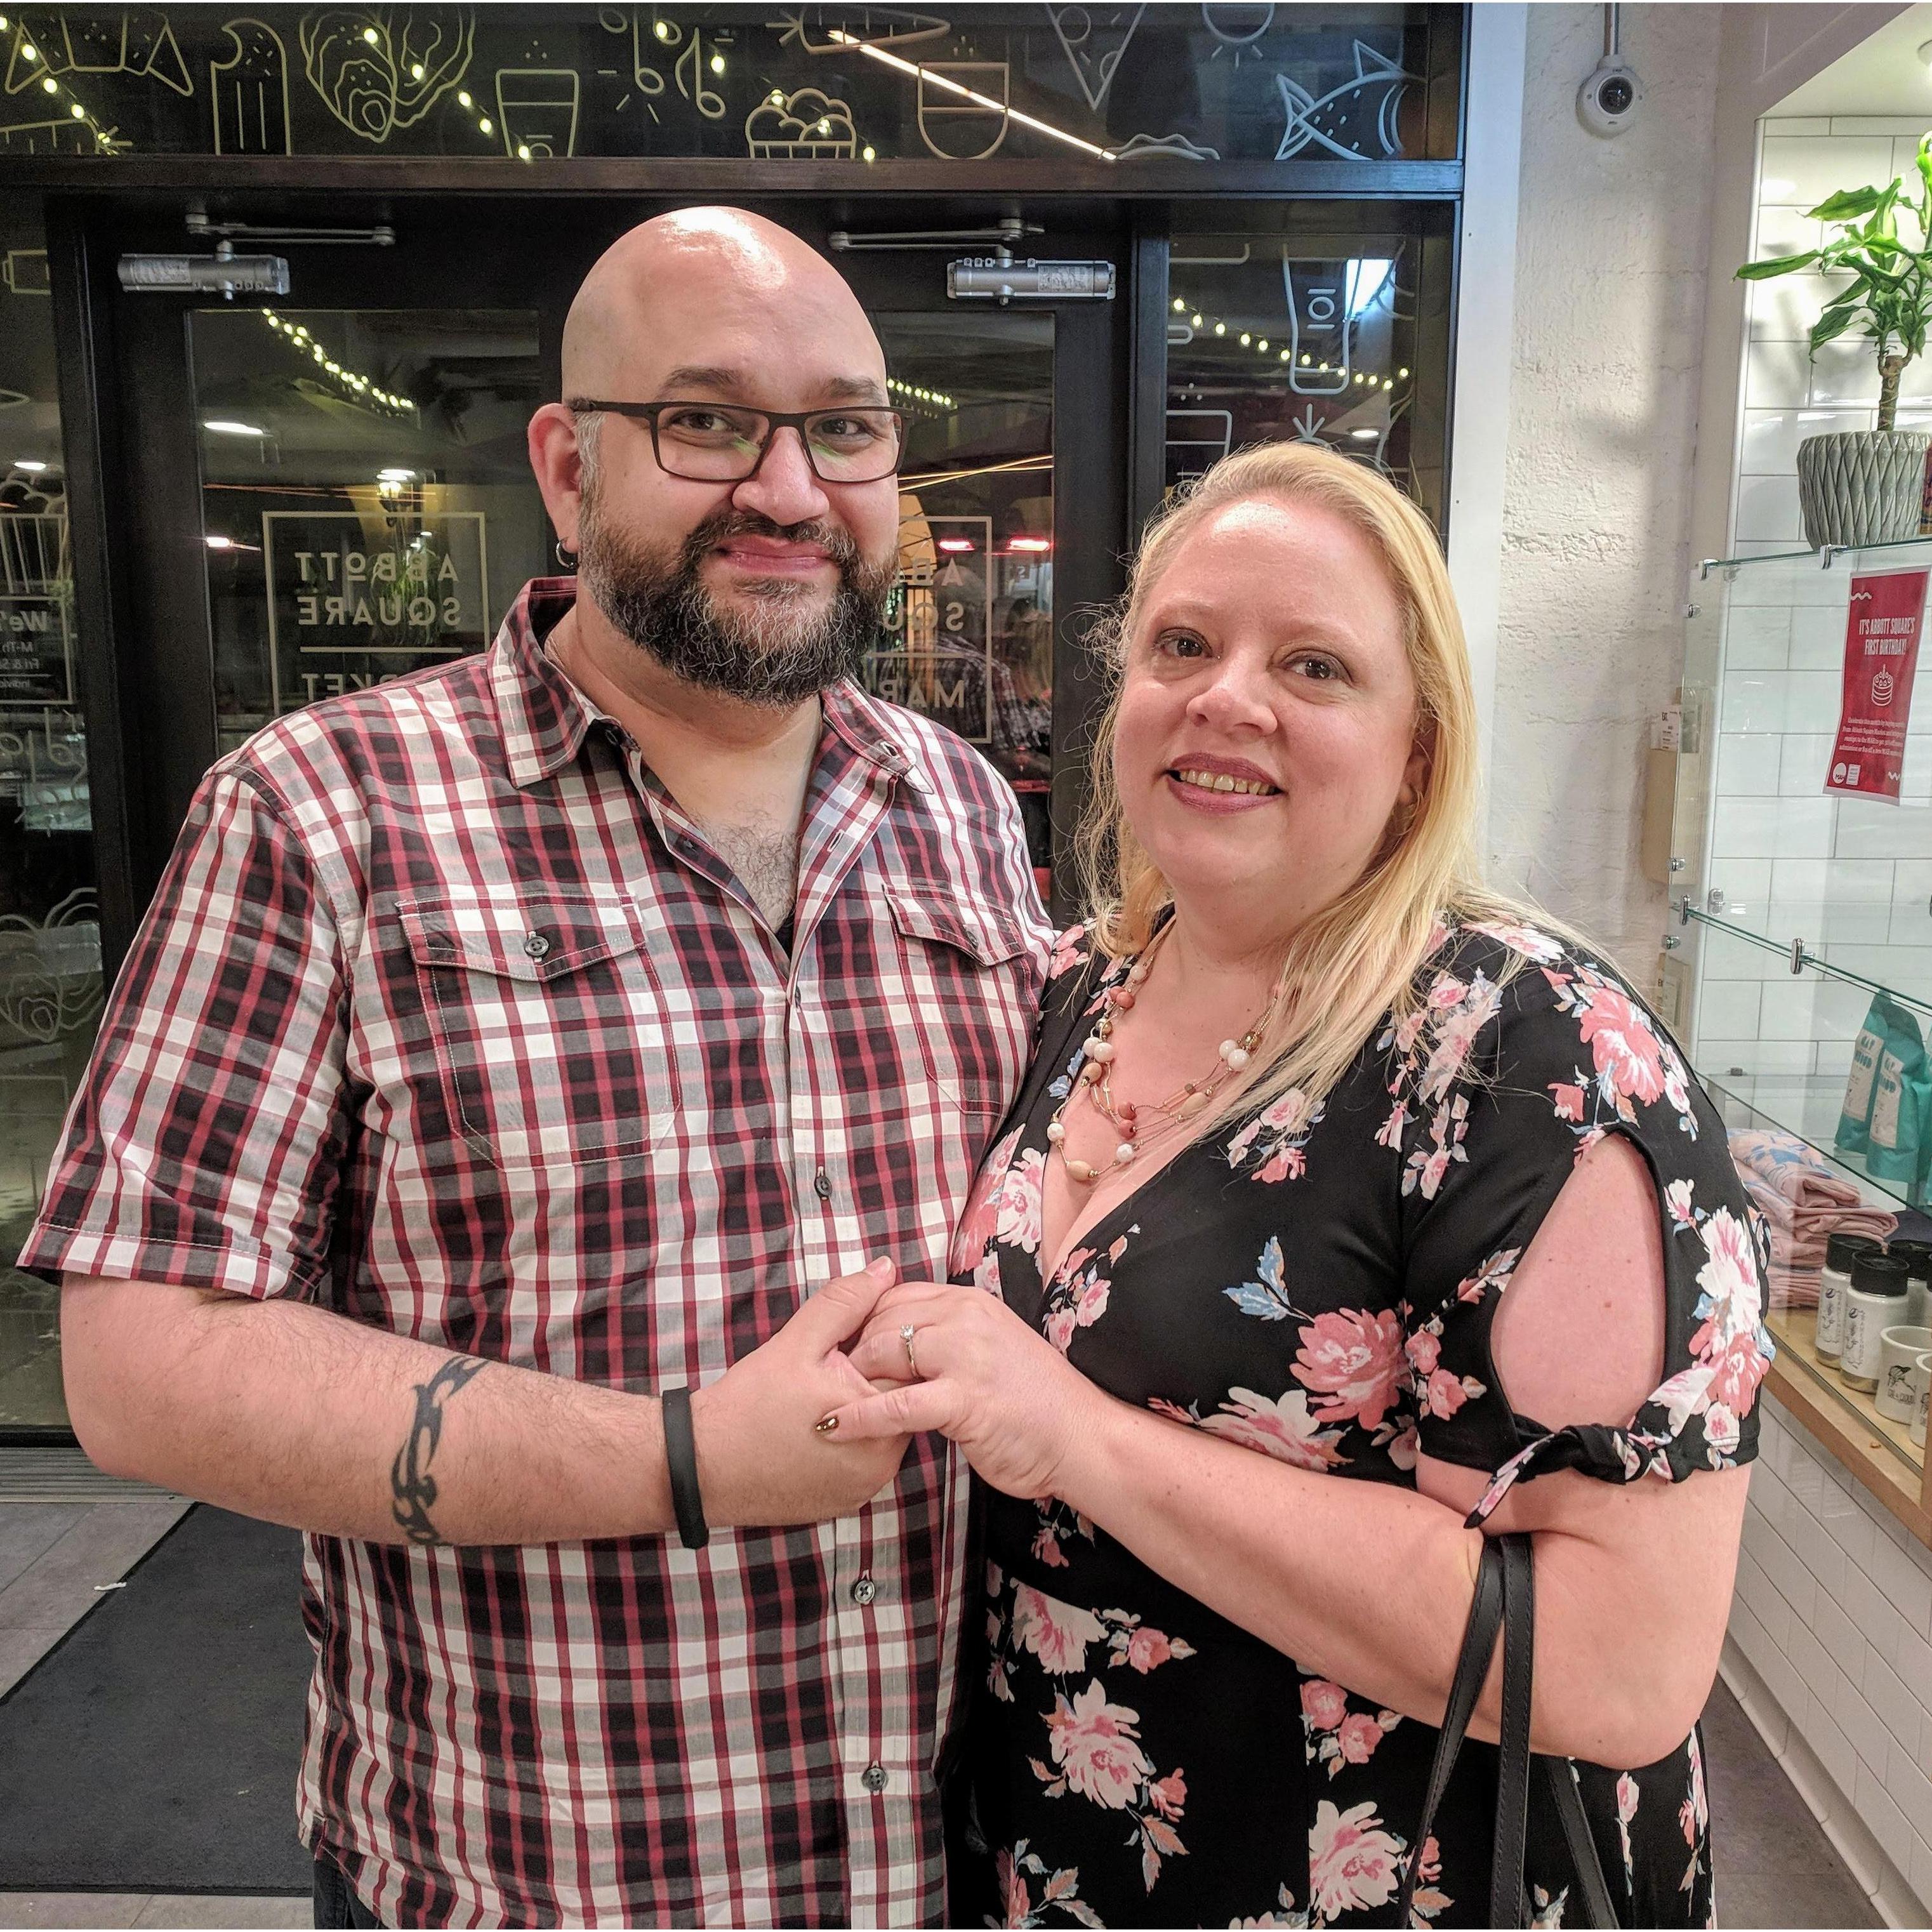 The night Jesse proposed. Some ladies in this ice cream shop saw me looking at my ring and asked if we just got engaged, then offered to take a photo! I think they were as excited as we were.